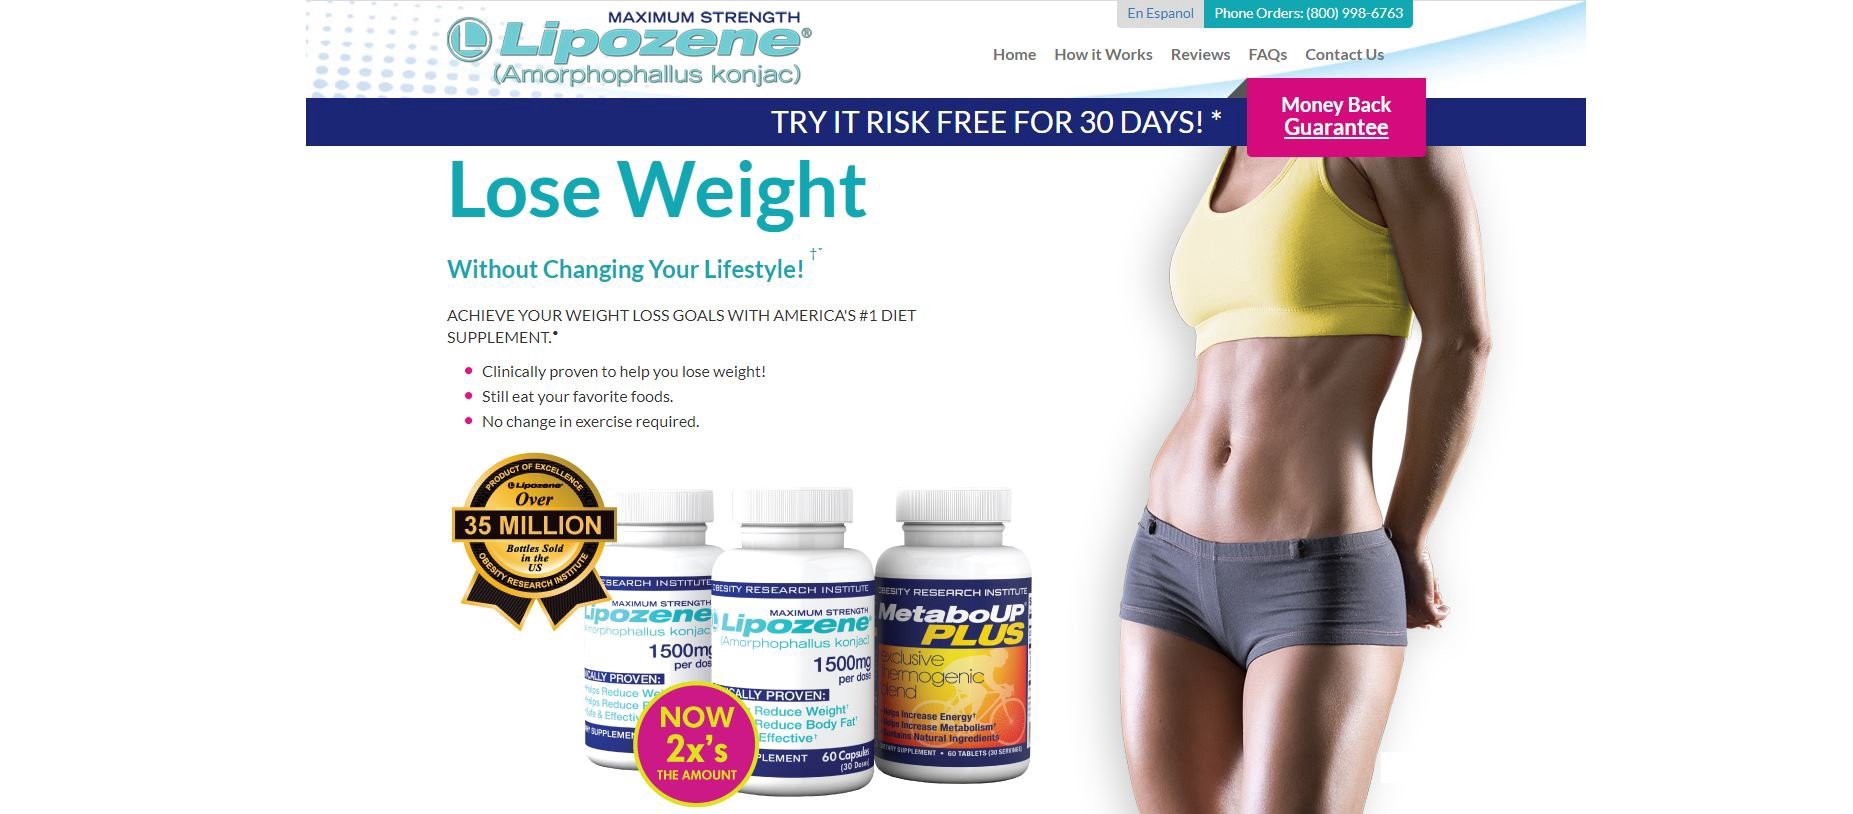 Lipozene Review: Does It Work and Is It Safe?